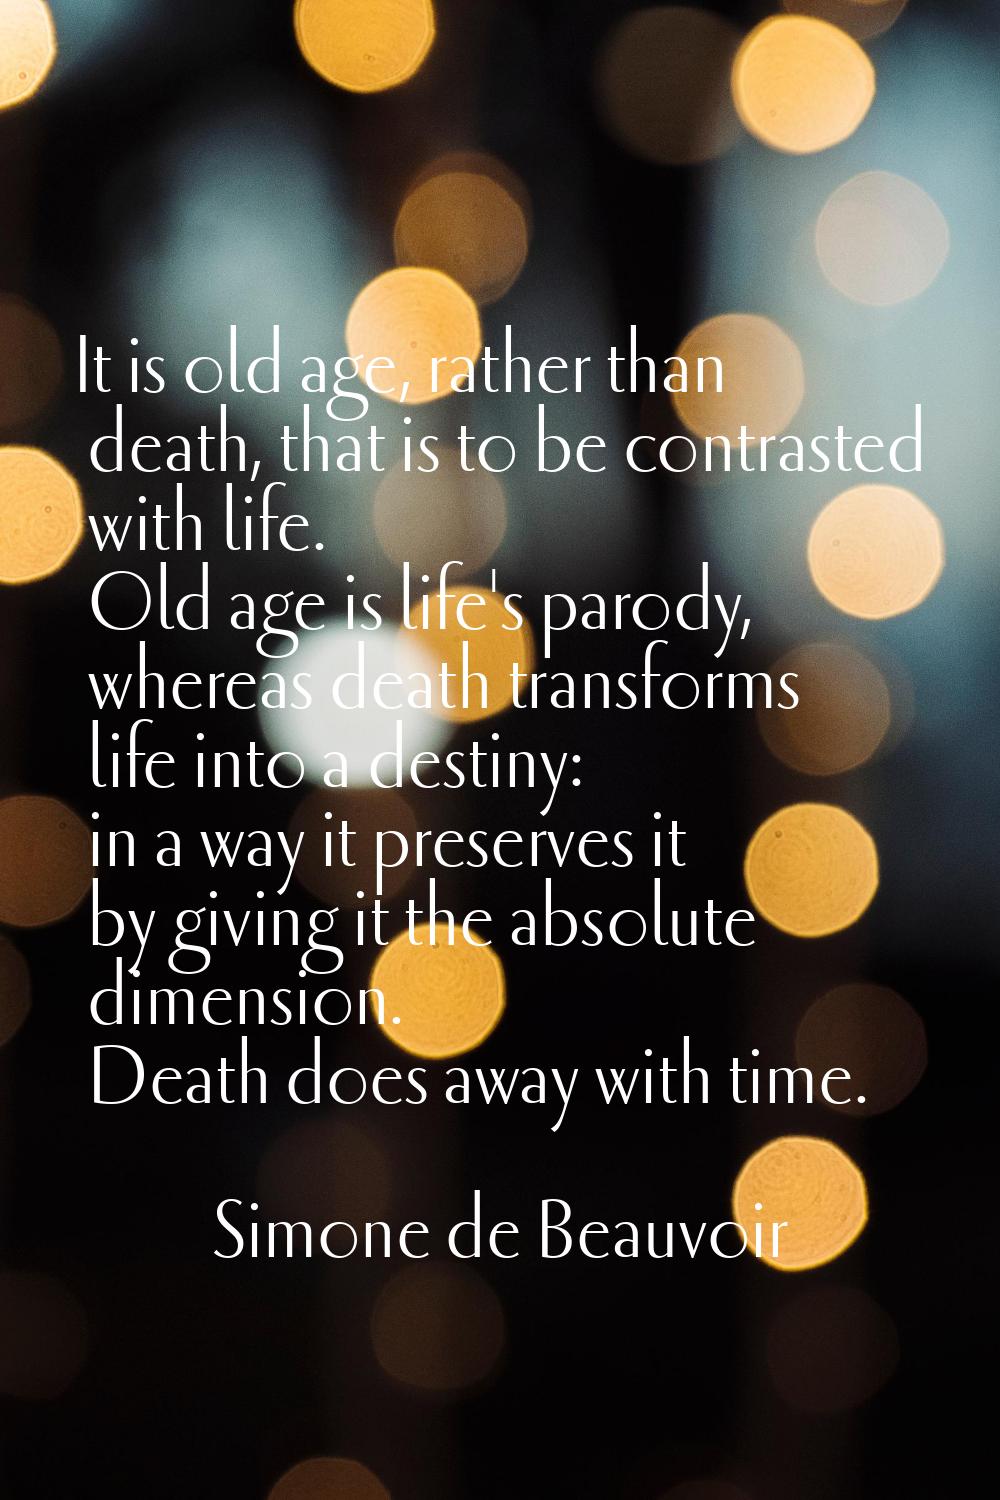 It is old age, rather than death, that is to be contrasted with life. Old age is life's parody, whe